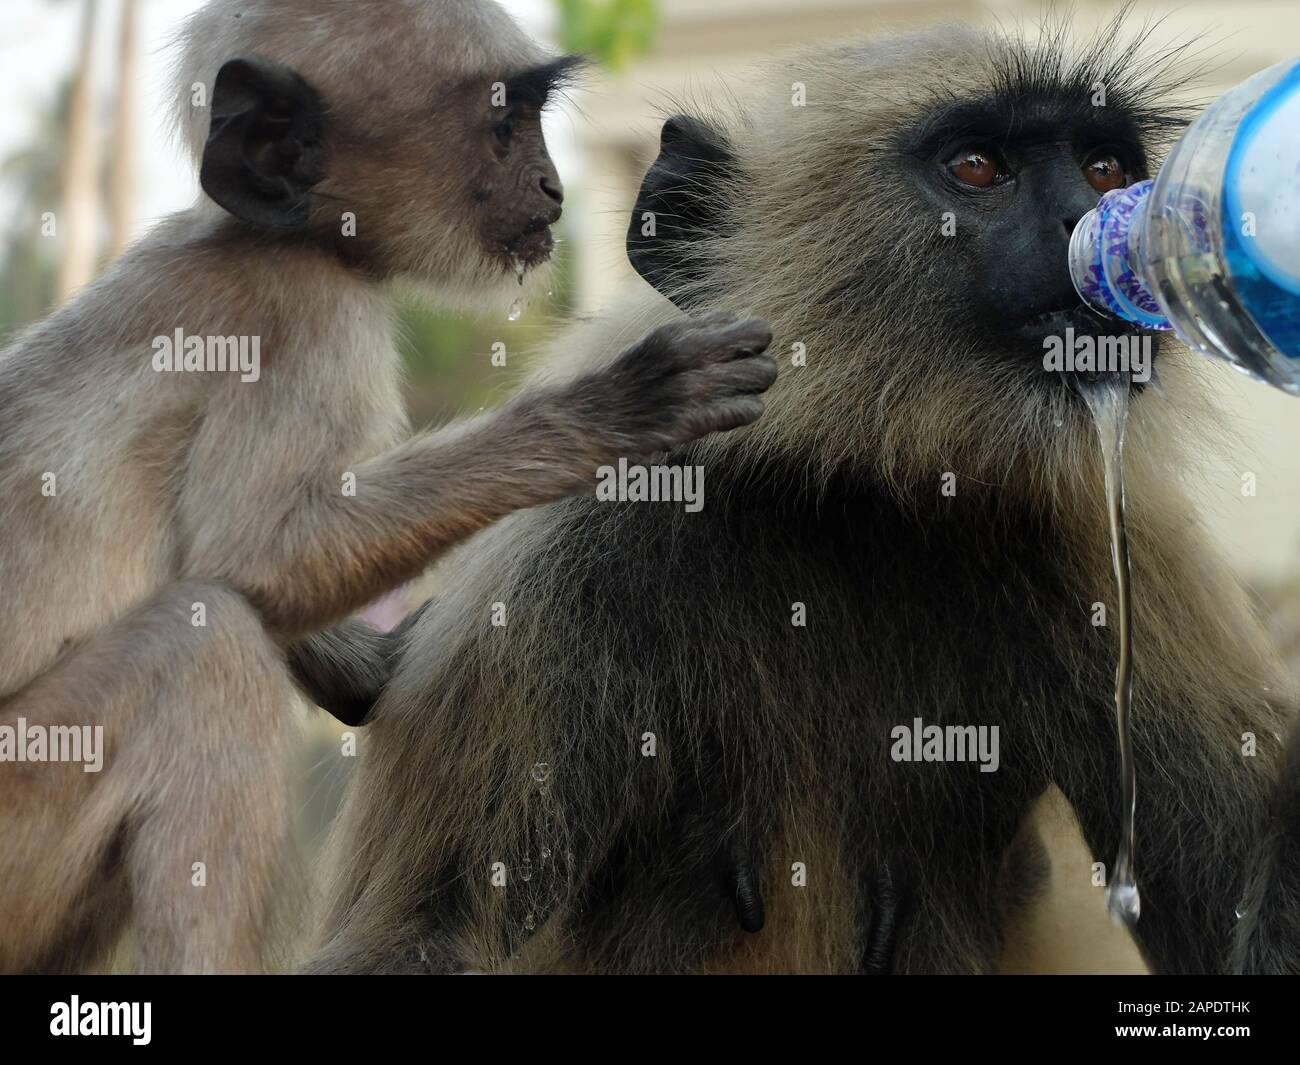 Pig tailed macaque monkeys being given water by visitors near Dakshineswar Kali Temple next to Hooghly river. Stock Photo